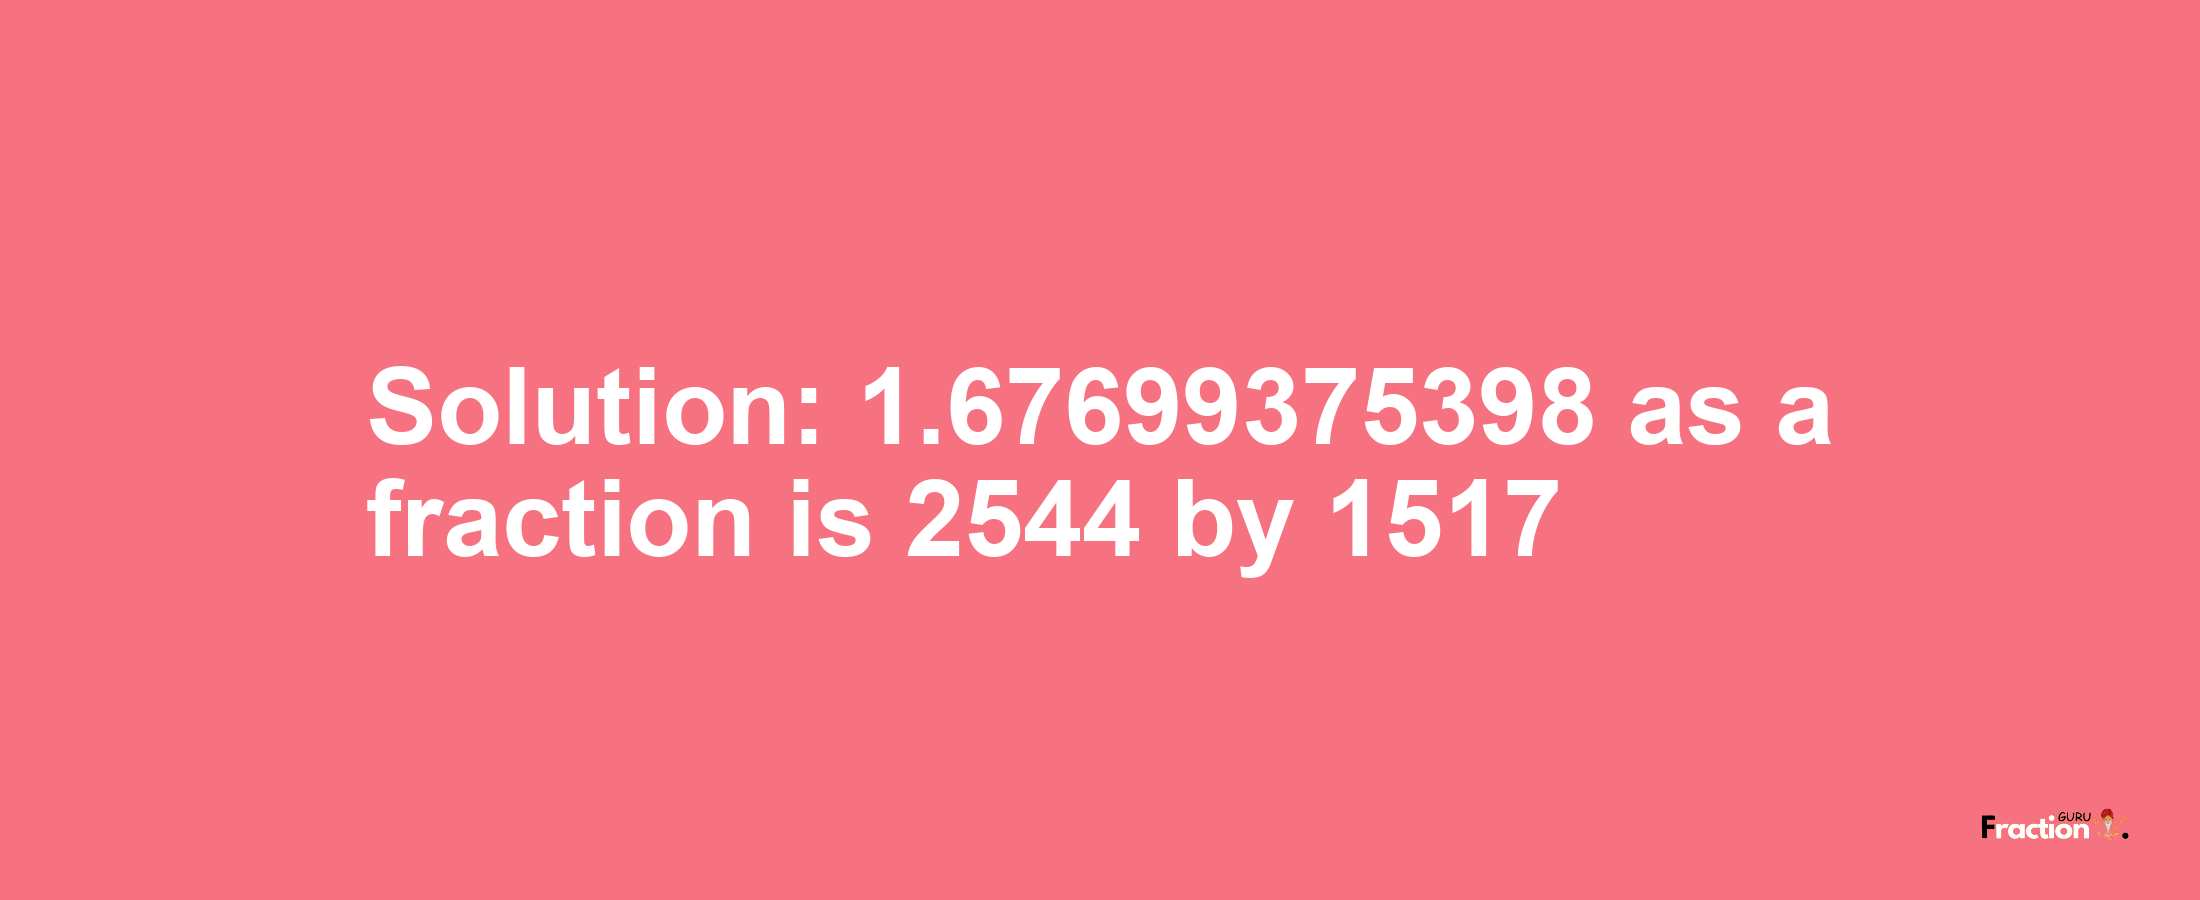 Solution:1.67699375398 as a fraction is 2544/1517